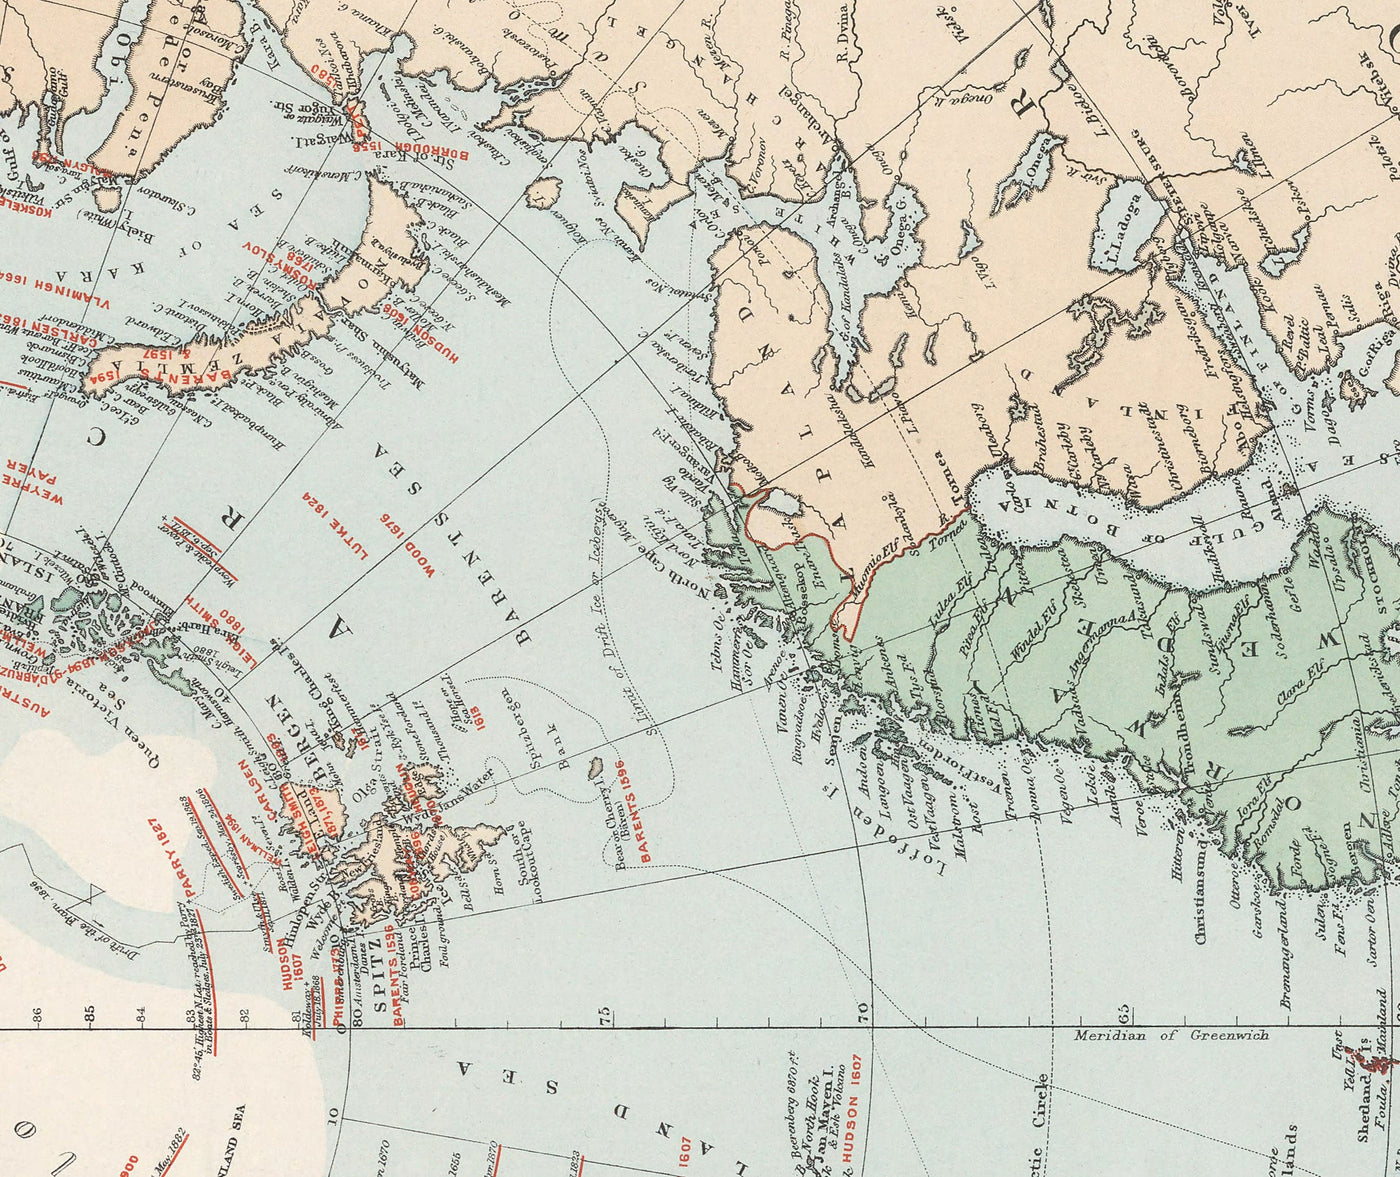 Old North Pole Map, 1904 by Edward Stanford - Vintage Atlas Explorer Map of the Arctic Circle